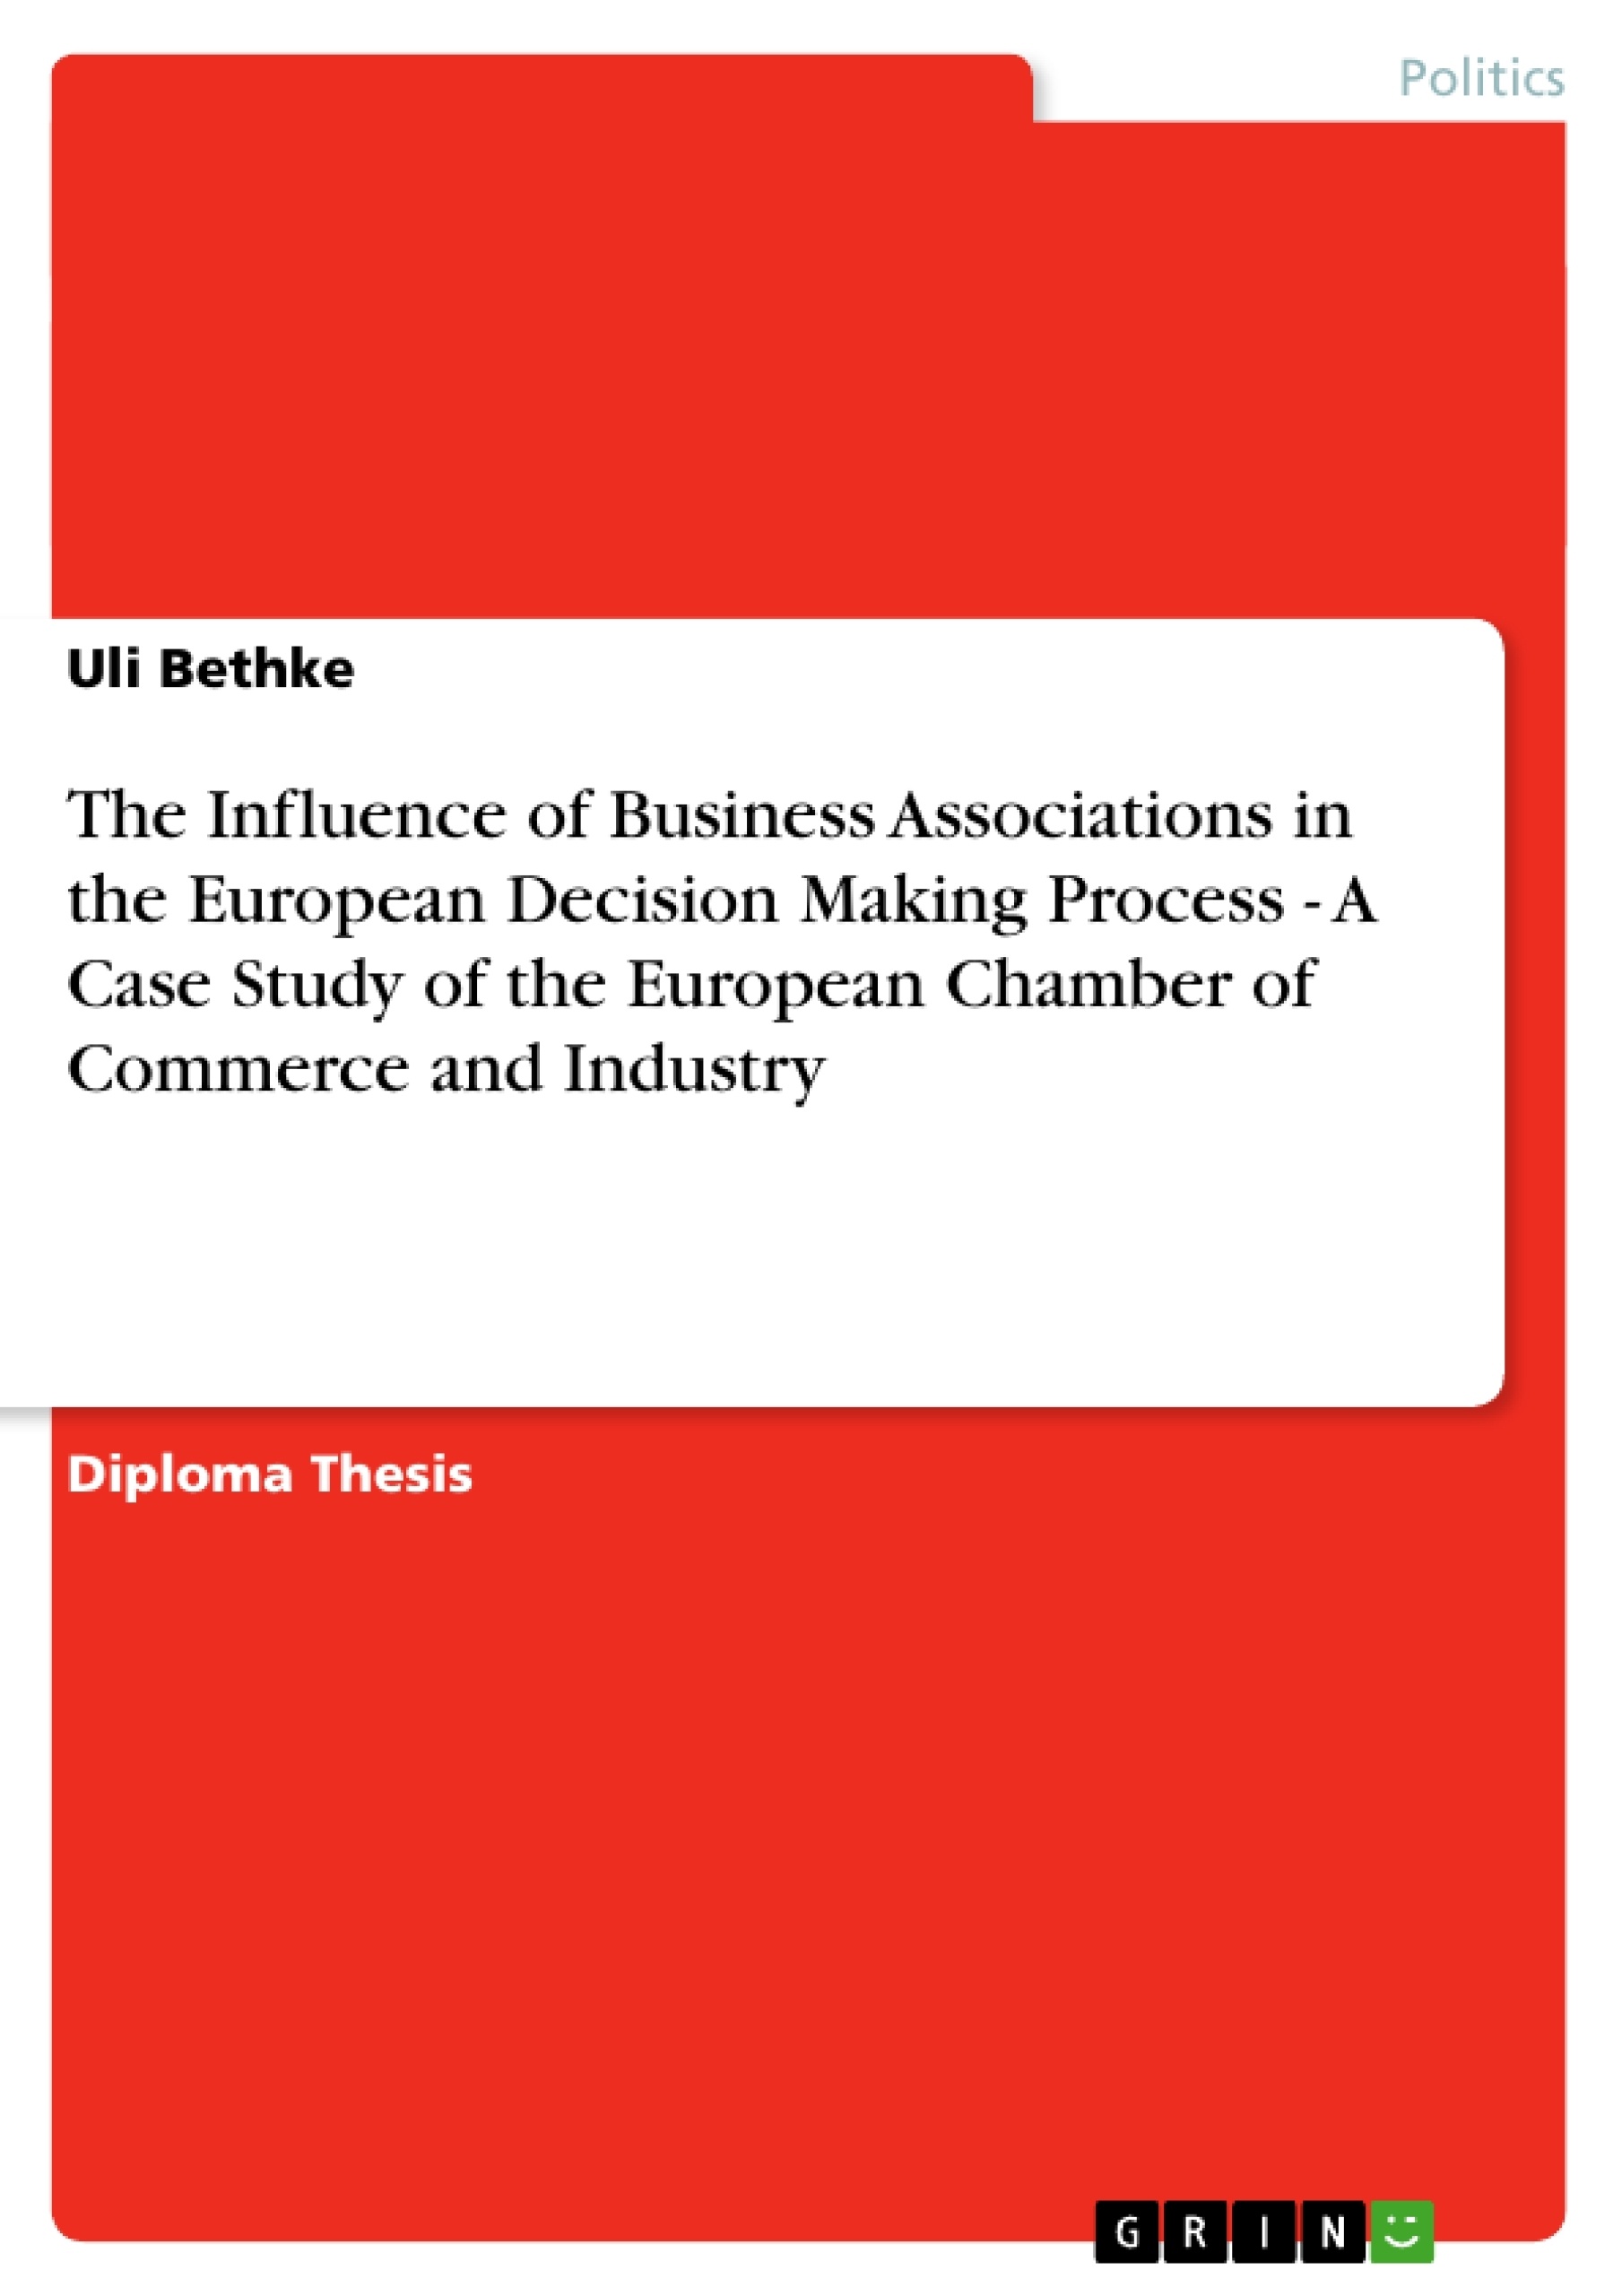 Título: The Influence of Business Associations in the European Decision Making Process - A Case Study of the European Chamber of Commerce and Industry